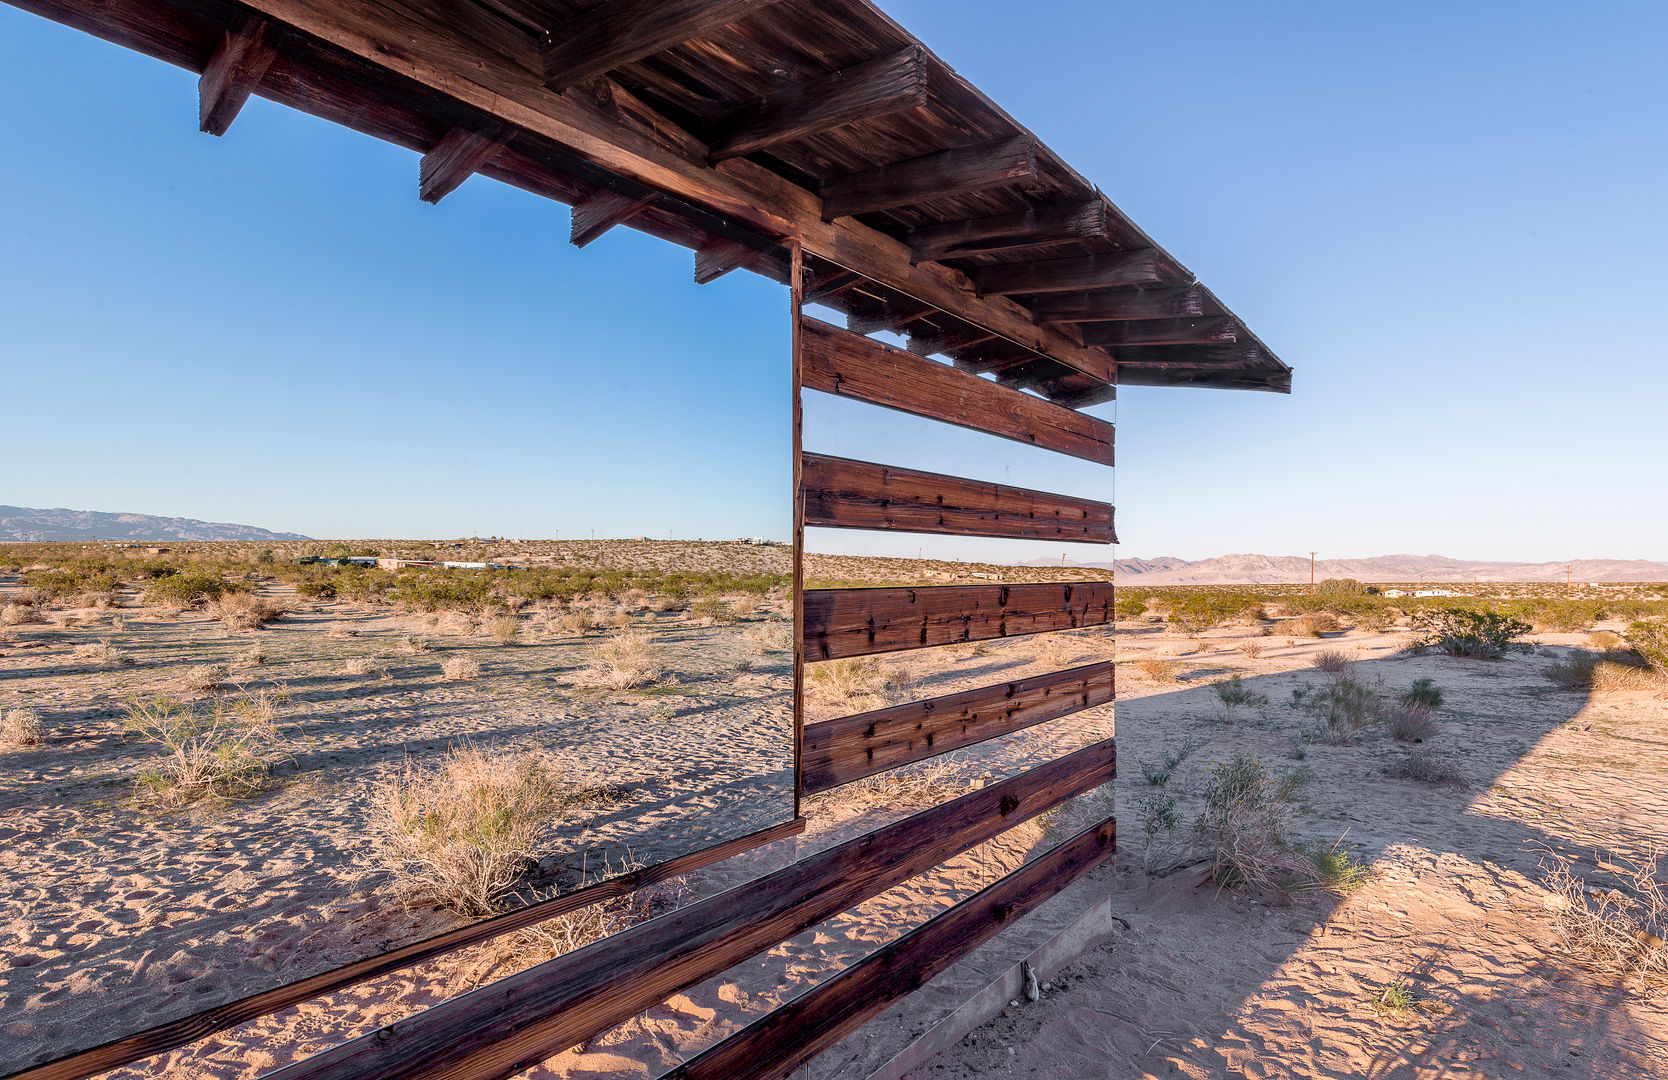 Lucid Stead, royale projects : contemporary art royale projects : contemporary art 房子